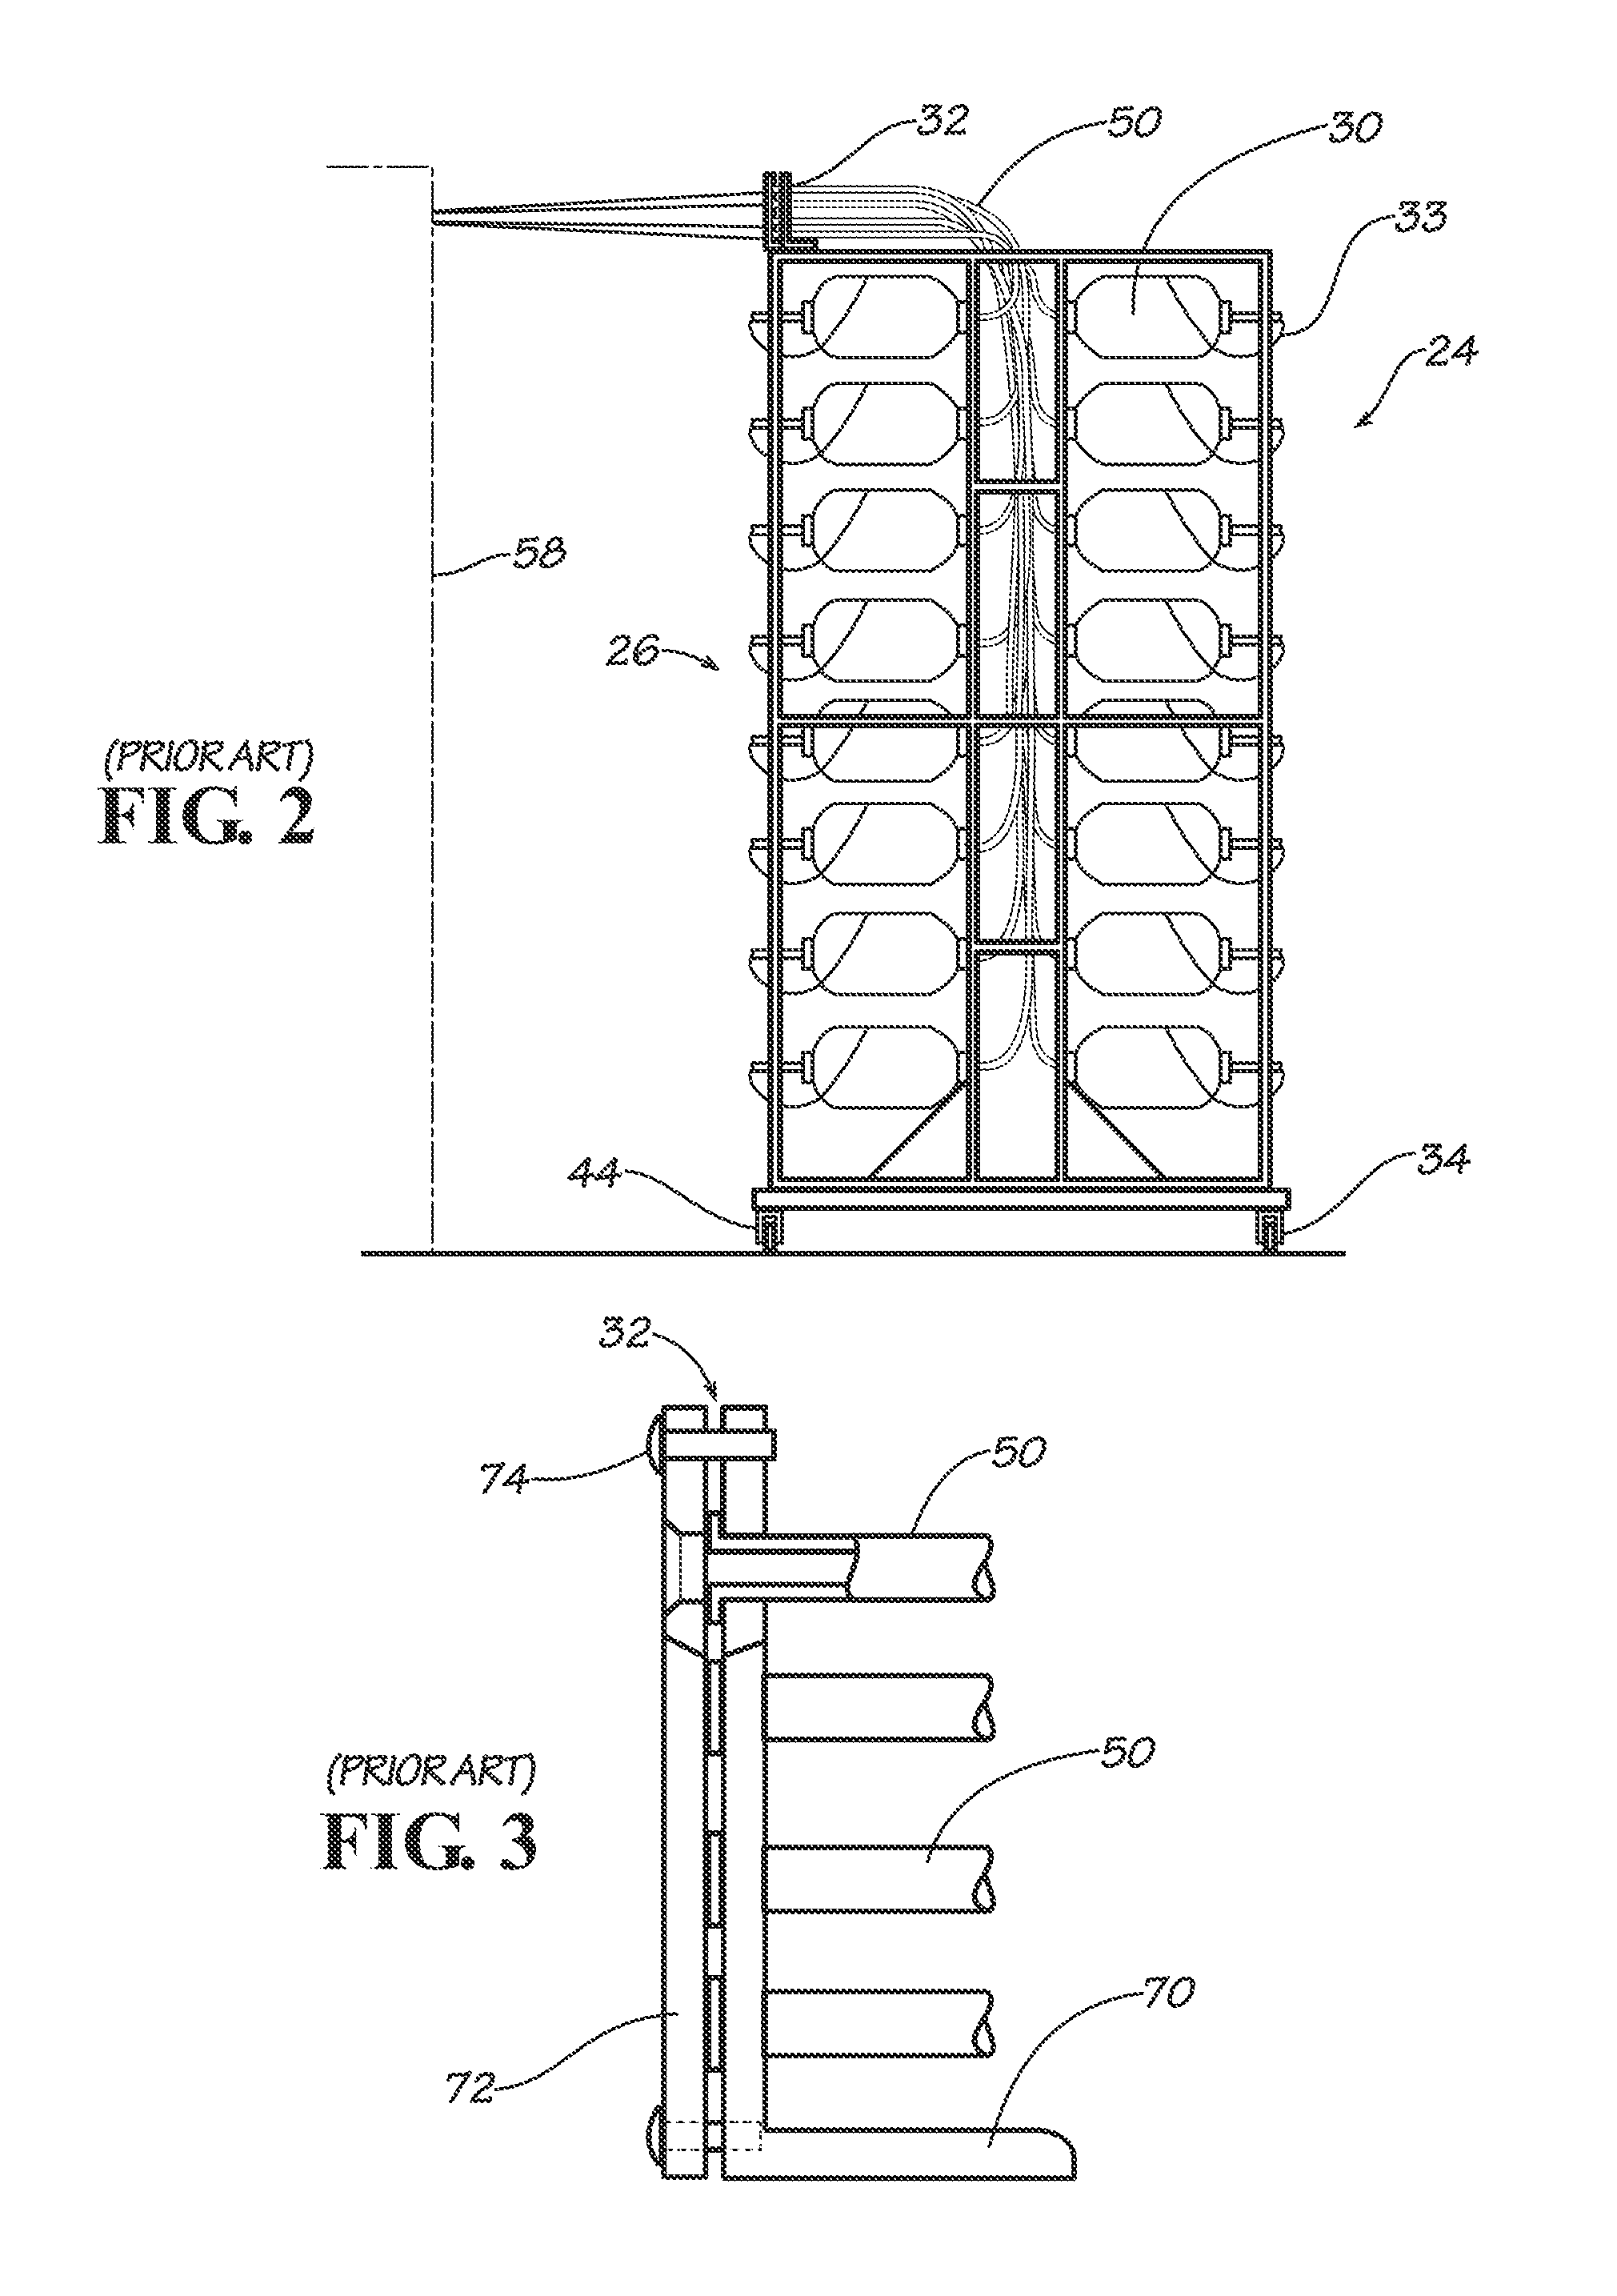 Portable Creels With Insertable Yarn Trays and Improved Headers and Yarn Handling Methods